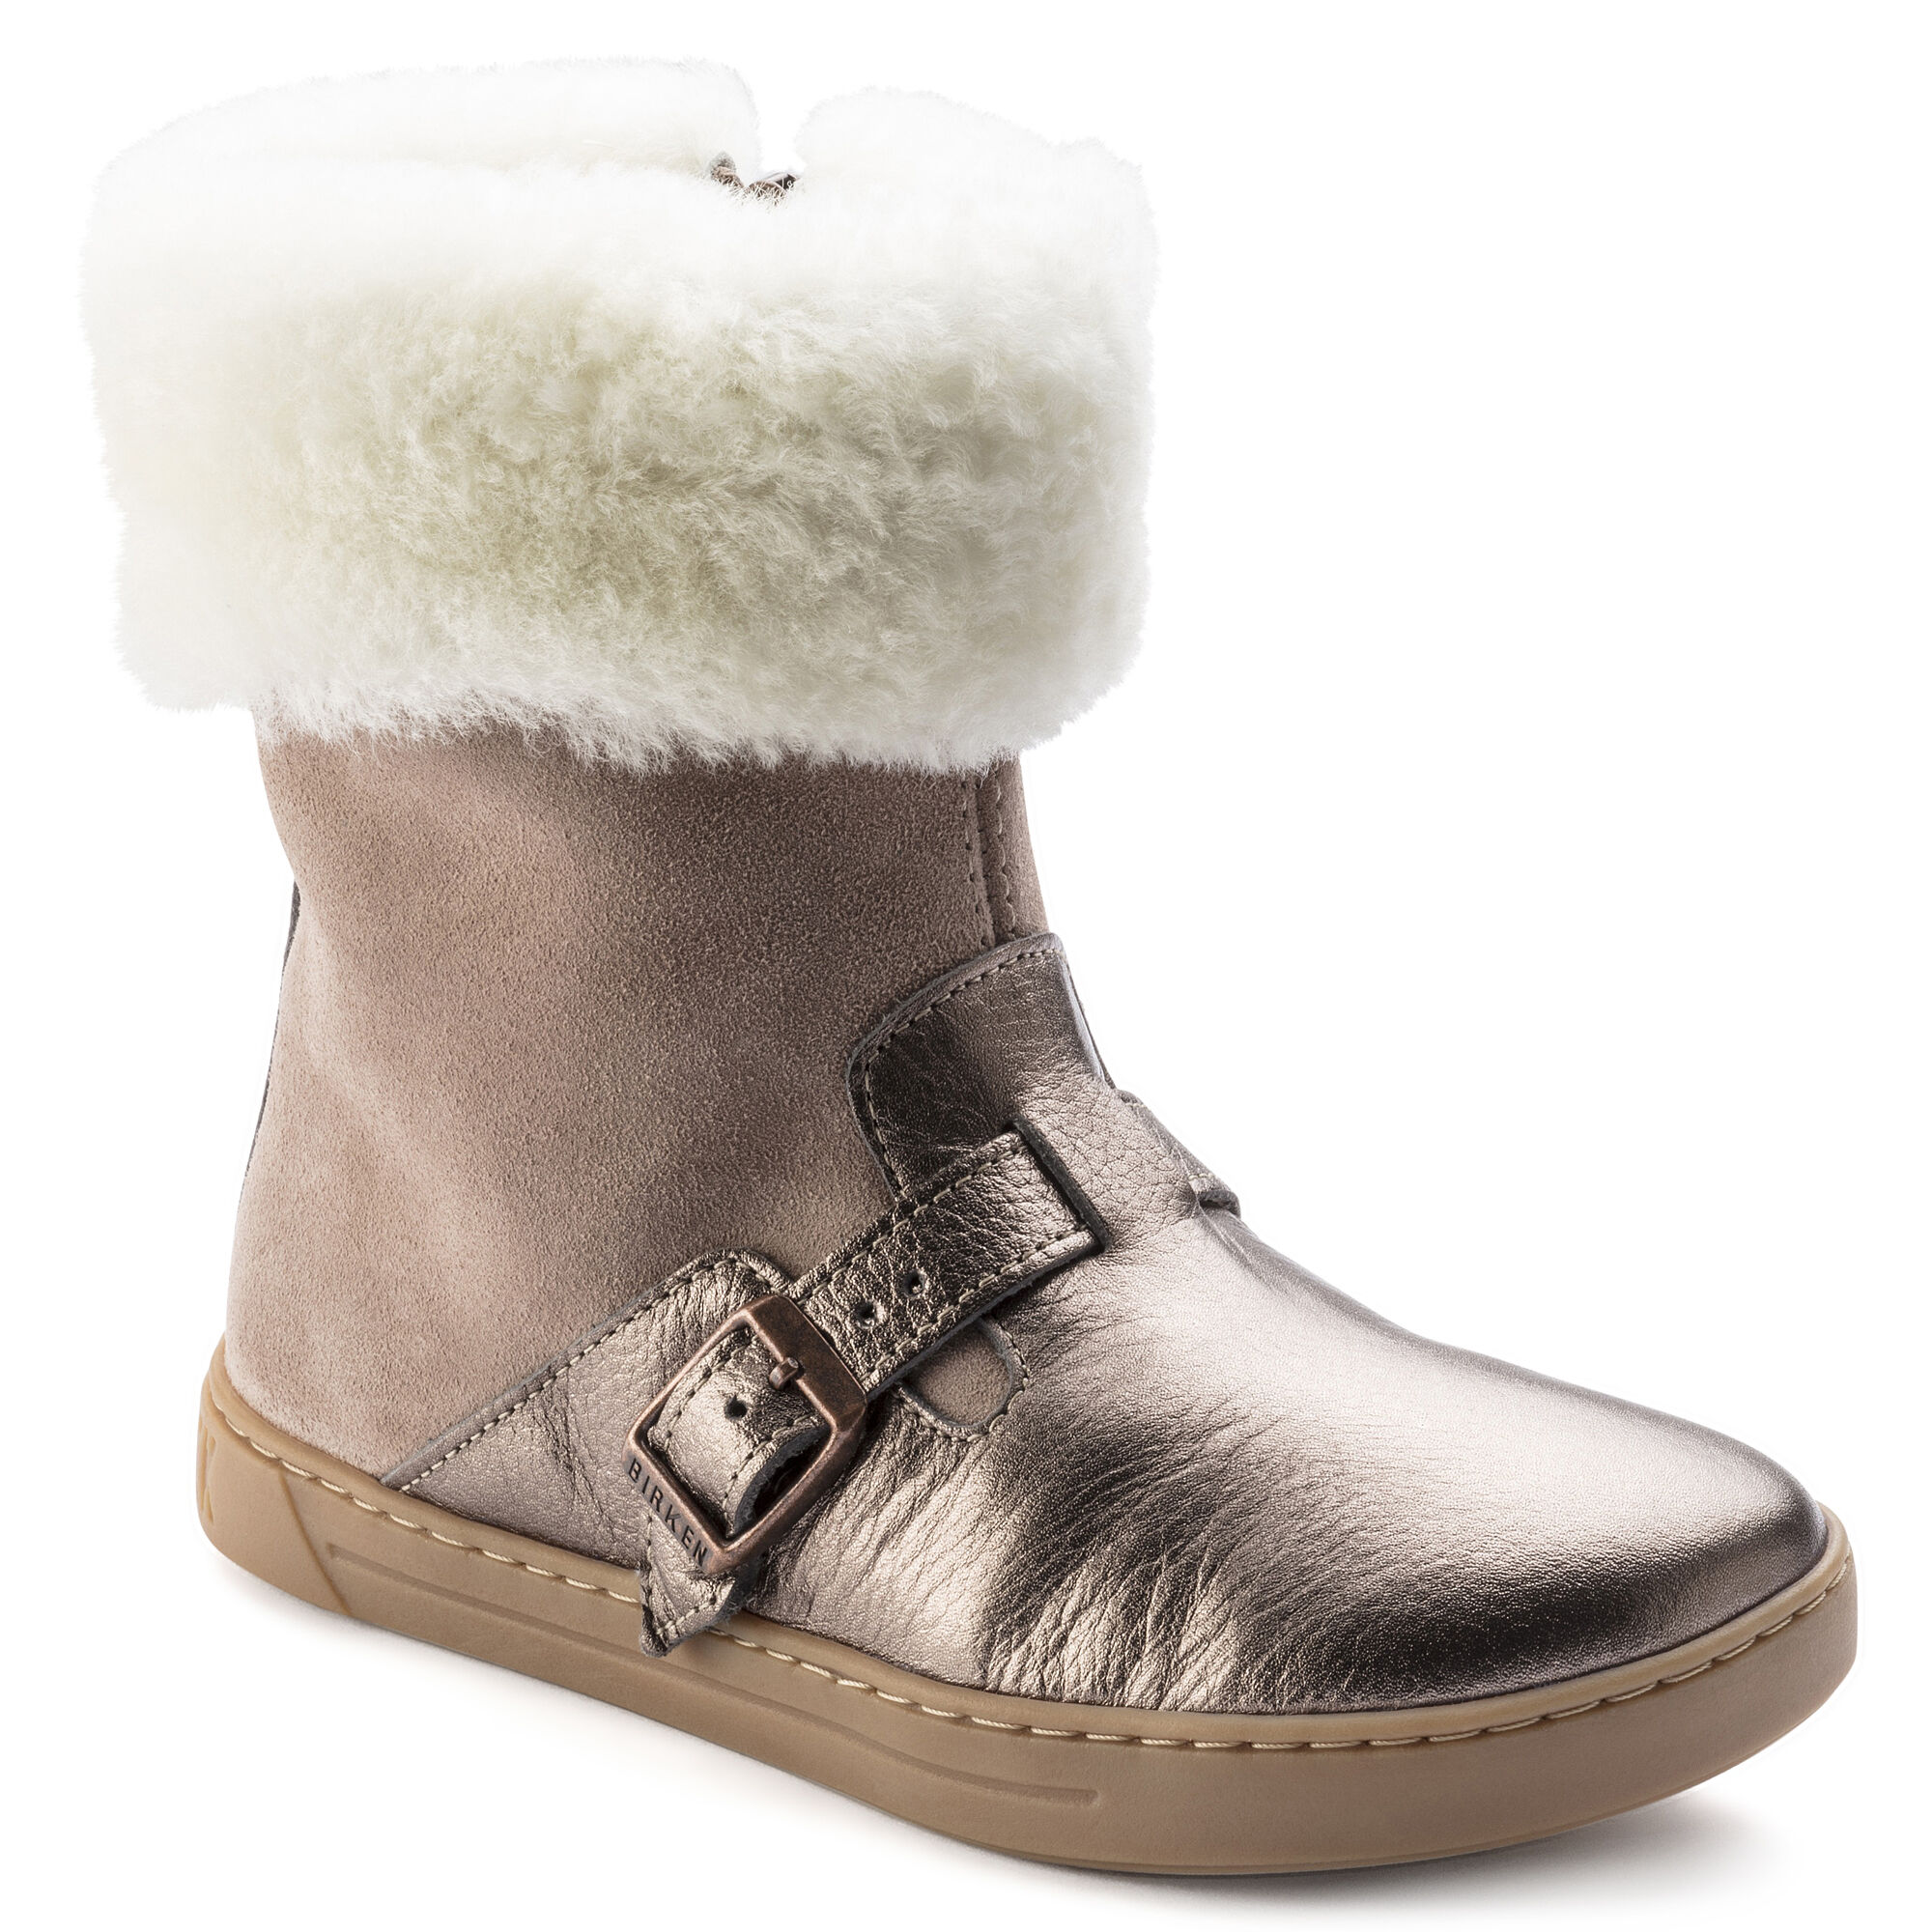 birkenstock womens stirling shearling lined boot